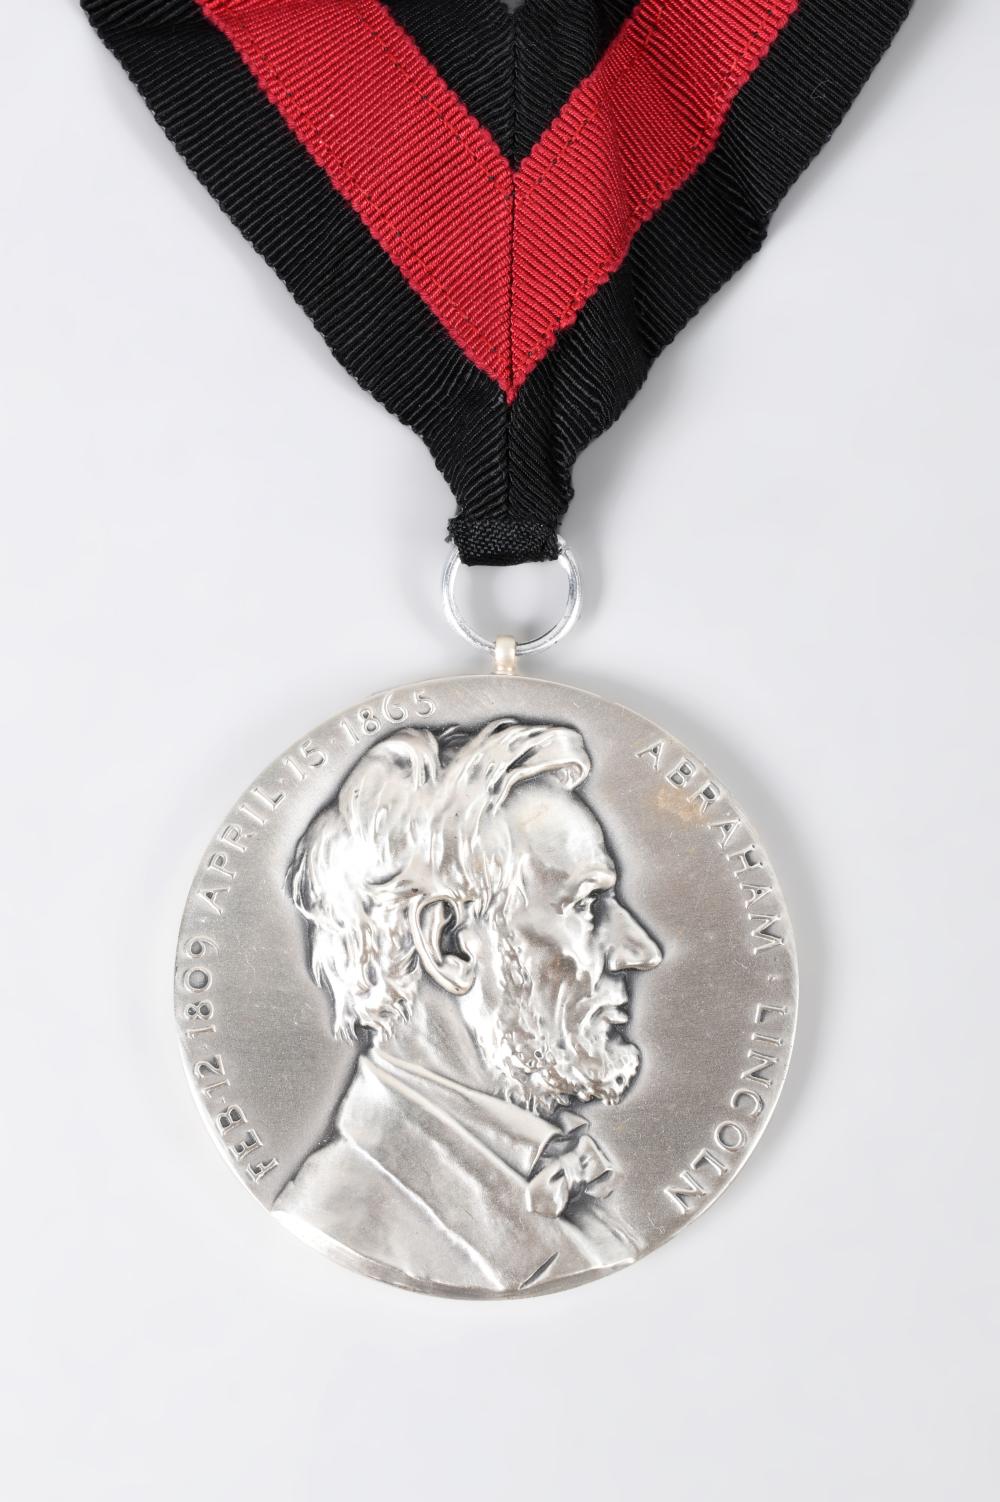 FORD S THEATRE LINCOLN MEDAL PRESENTED 33cdd2